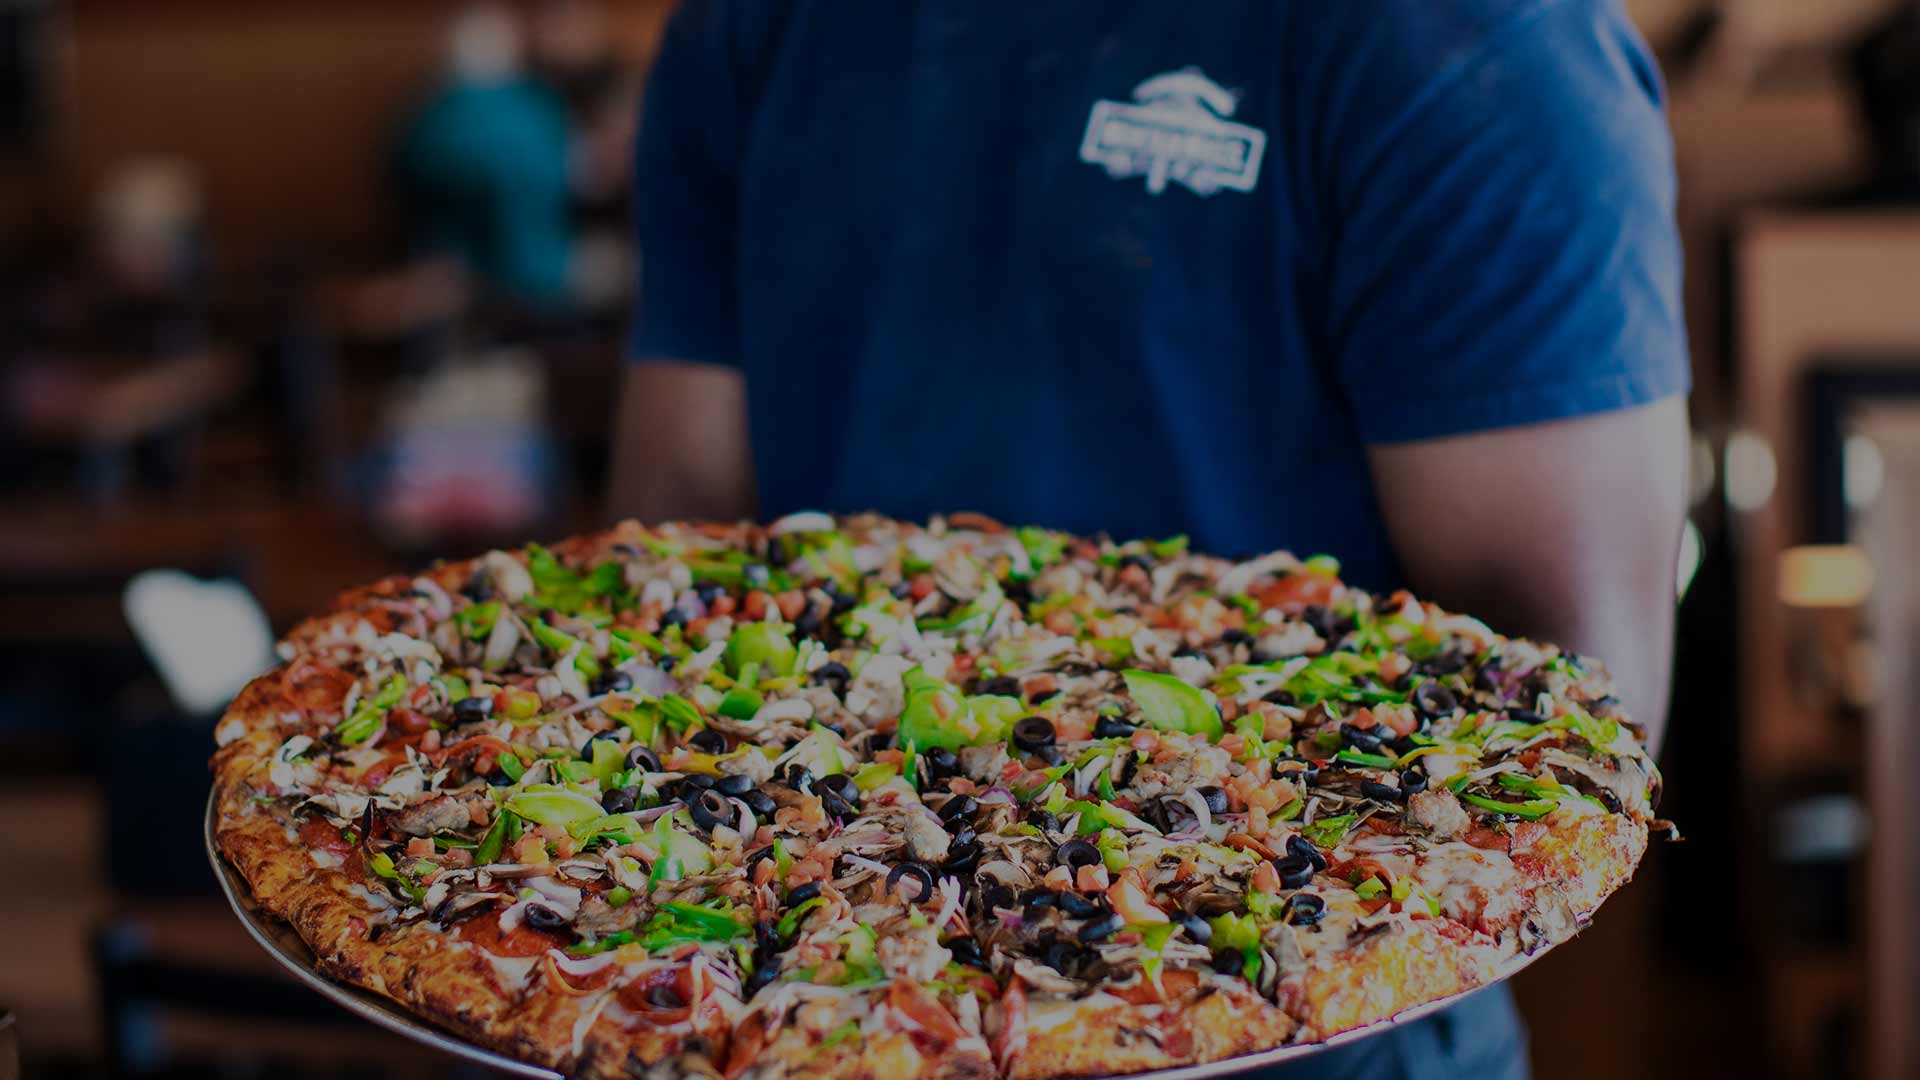 Featured image for “Power Pizza Report ranks Mountain Mike’s in Top 20 pizza chains for sales”